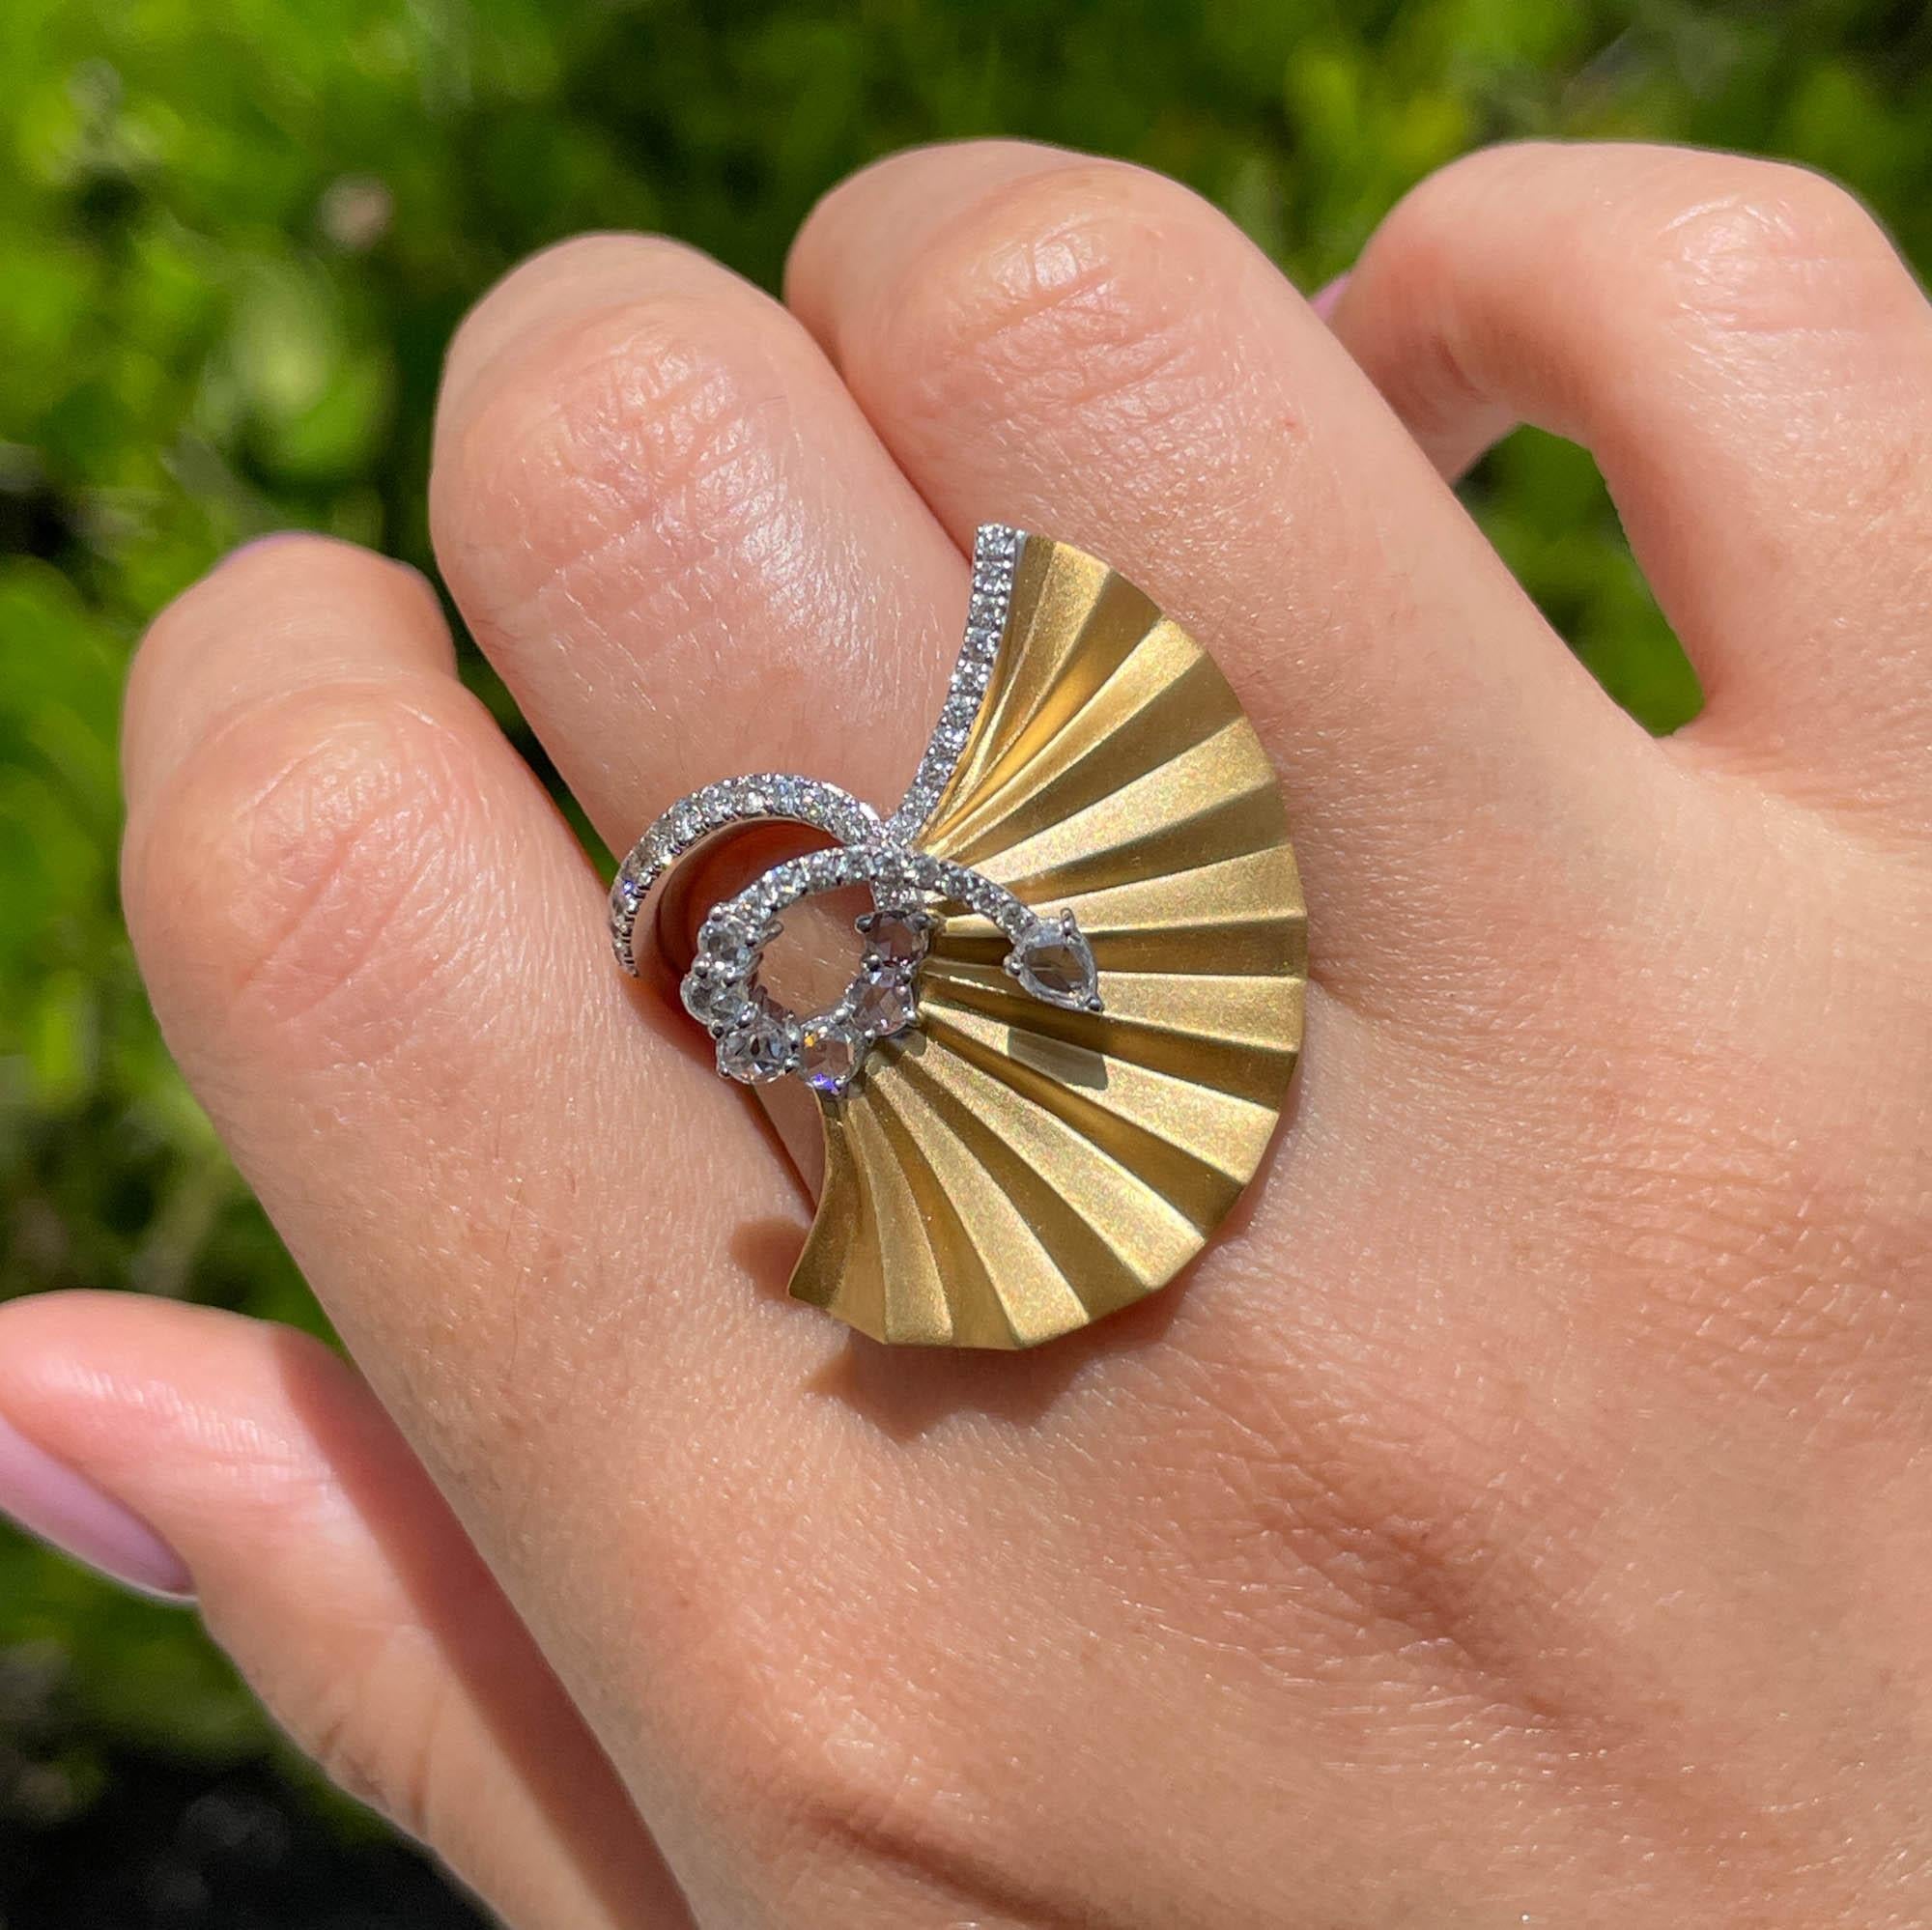 Jay Feder 18k Two Tone Gold Diamond Fan Plisse Ring; total weight of all diamonds is 0.81 carats.

The top's measurements are 31x24mm. The band tapers from 2.15mm to 5.19mm on the bottom. Sits 8.49mm from the top of the finger. The ring size is 6